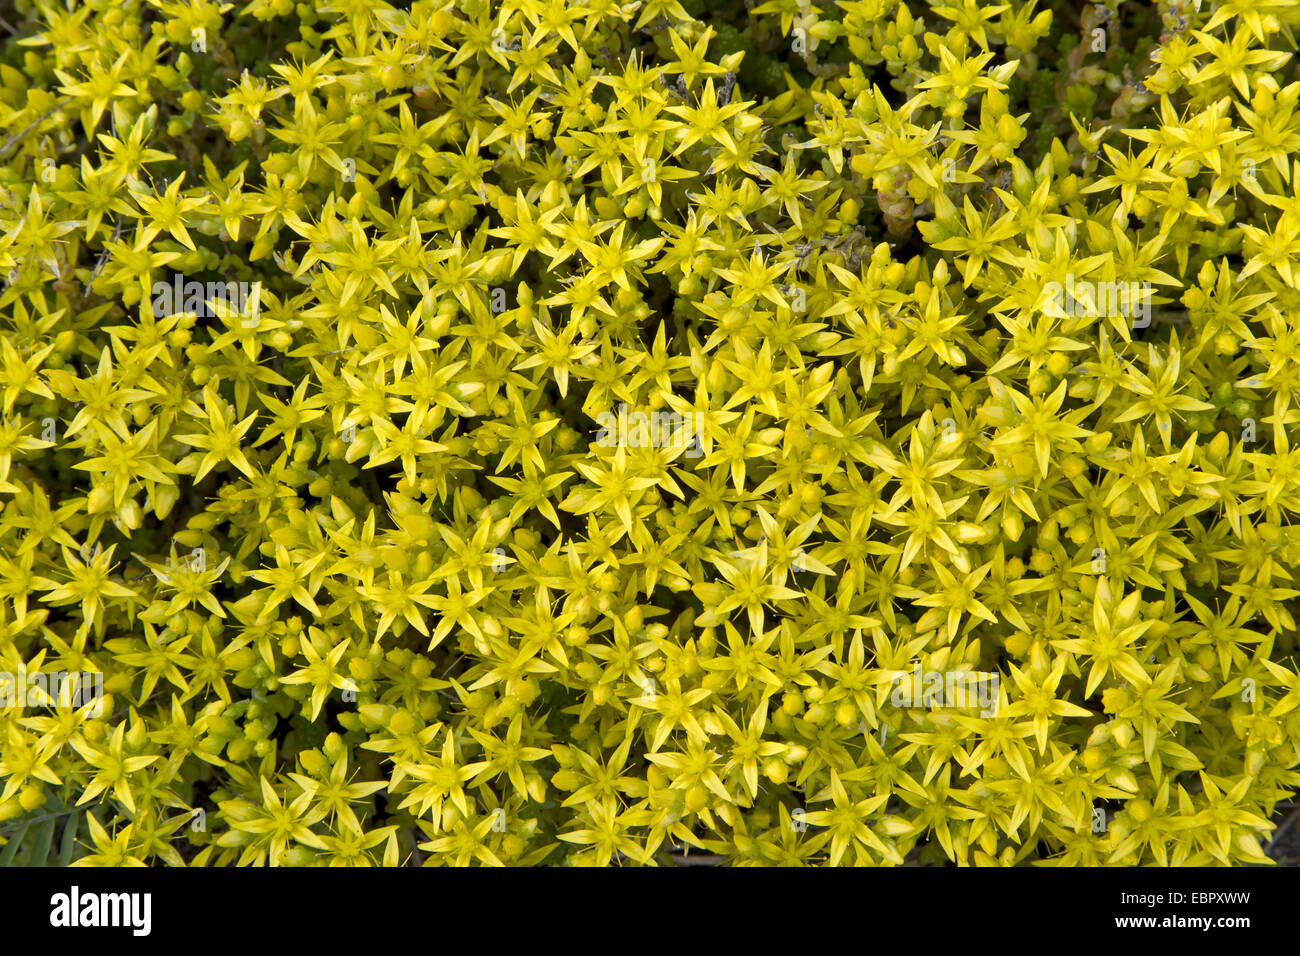 common stonecrop, biting stonecrop, mossy stonecrop, wall-pepper, gold-moss (Sedum acre), blooming, Germany, Schleswig-Holstein Stock Photo